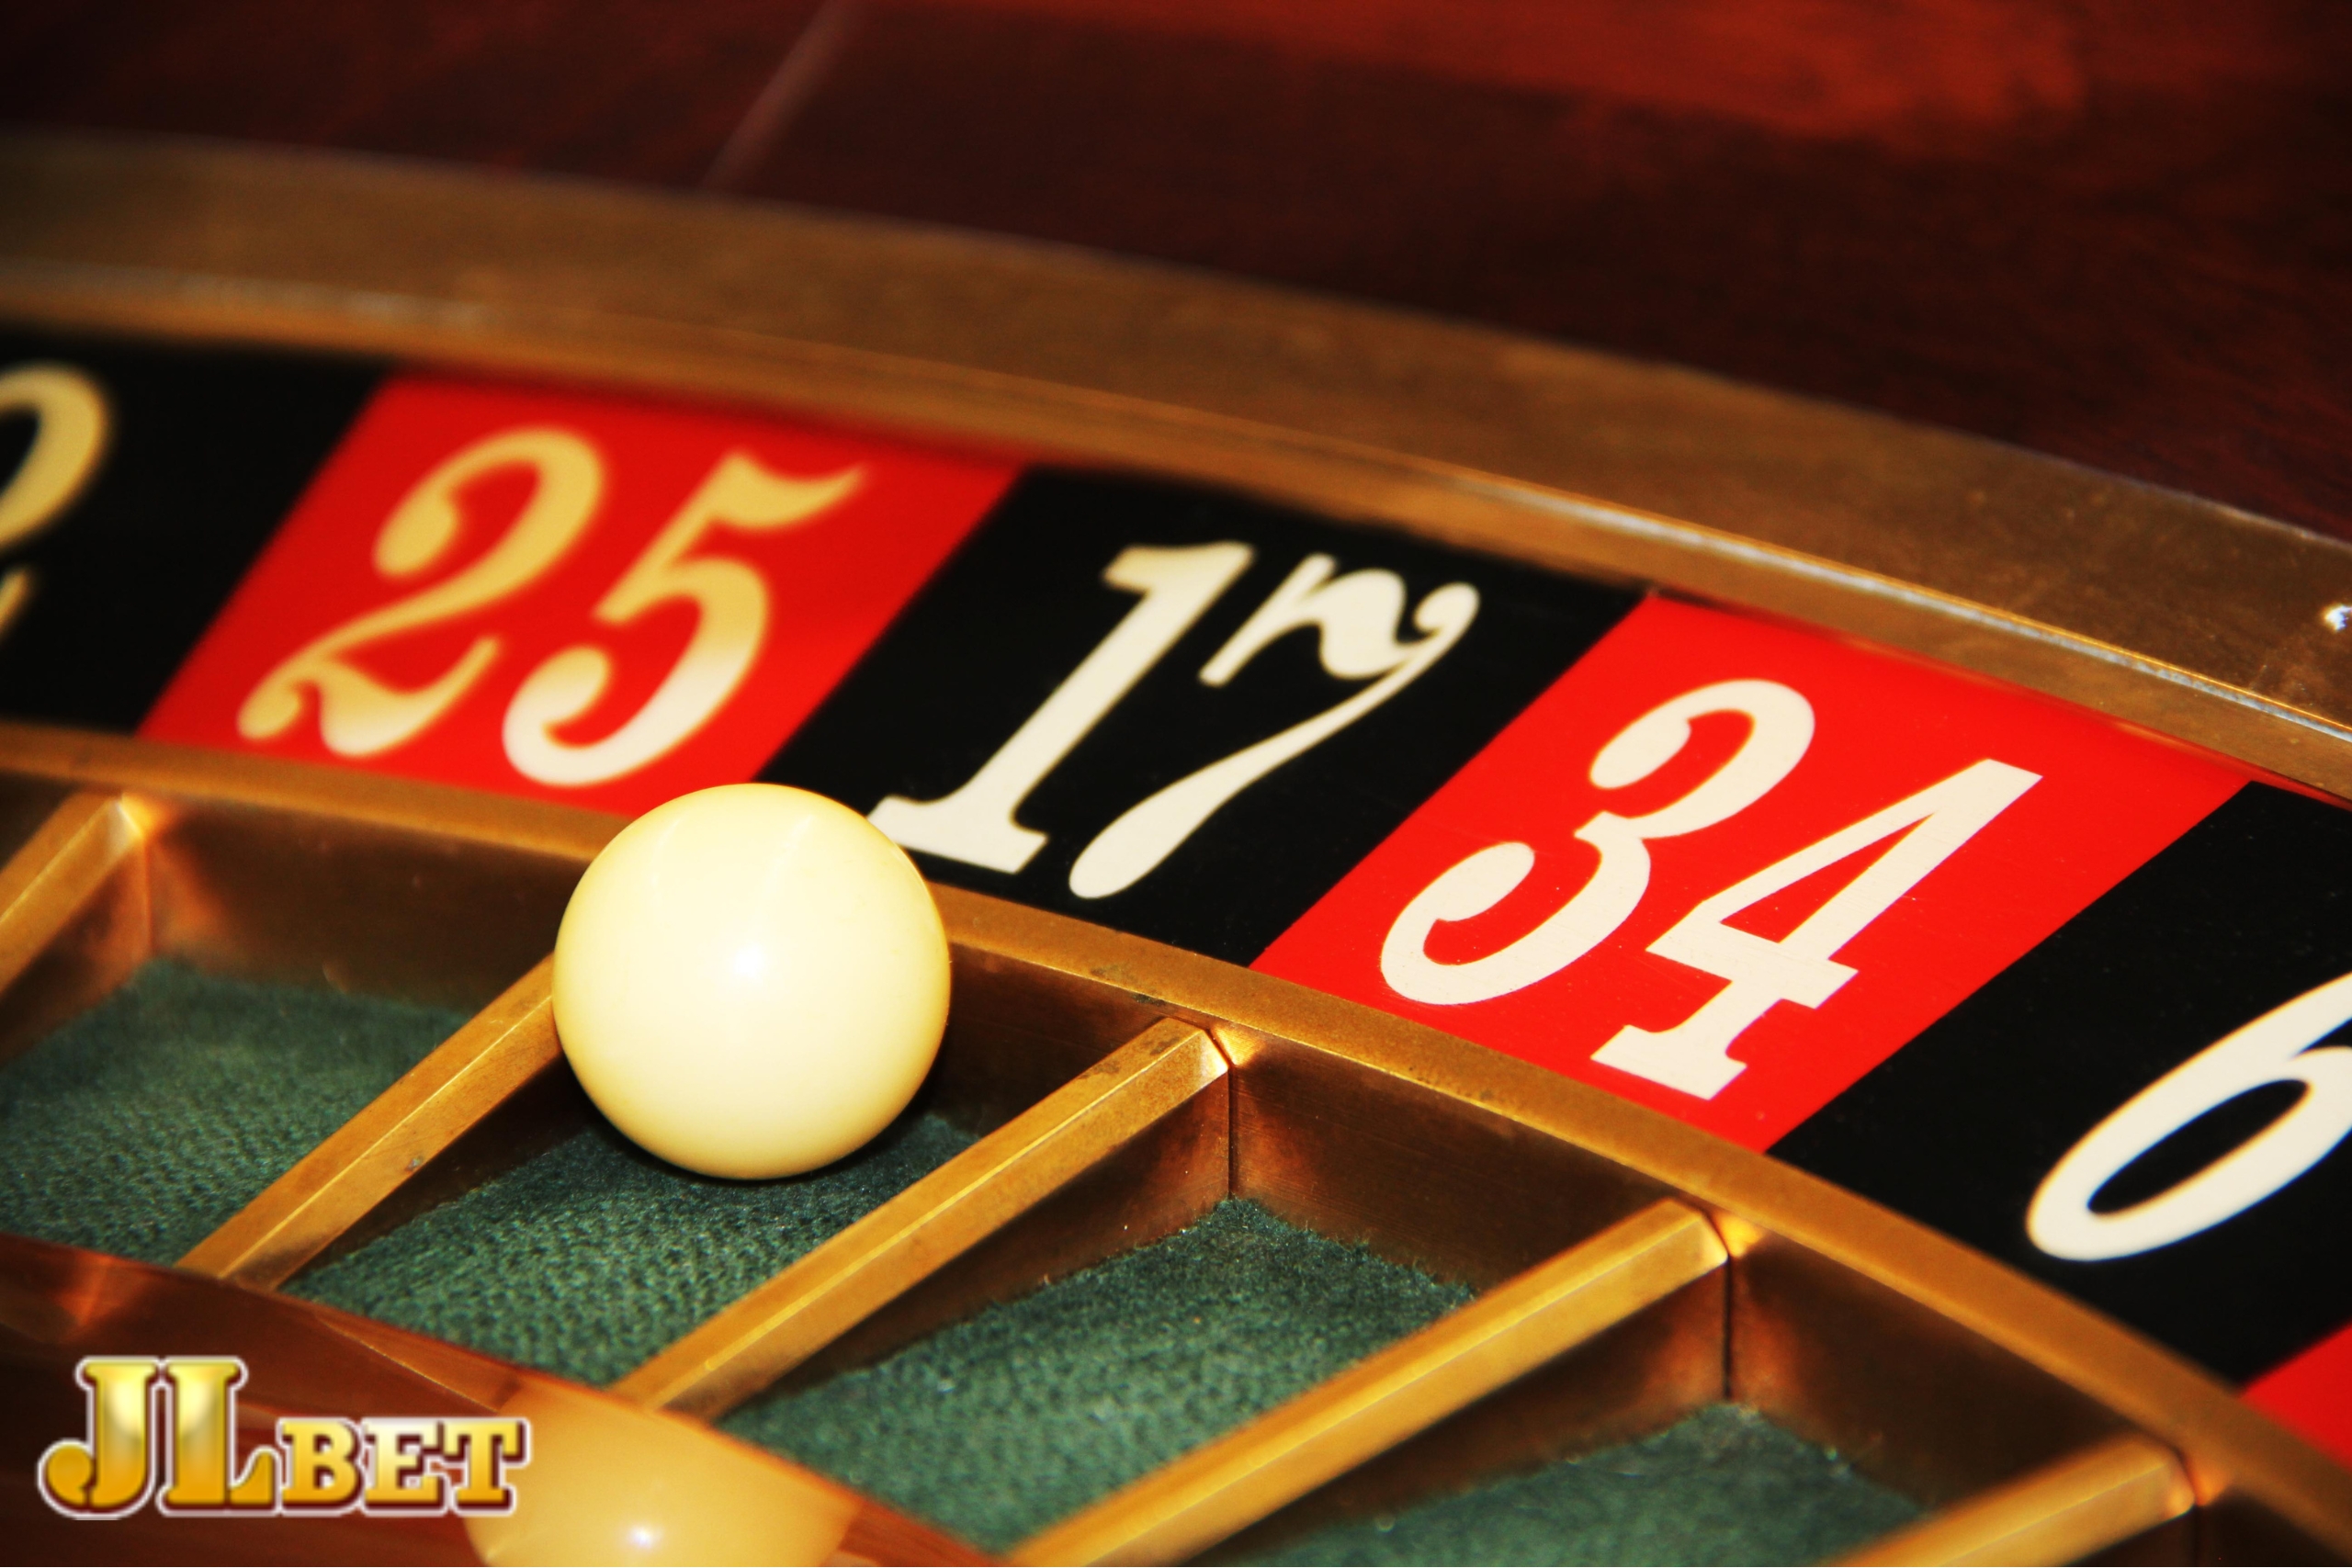 Free Bonus On Registration: The Perks Of Claiming Free Bonuses When Signing Up for Online Casinos